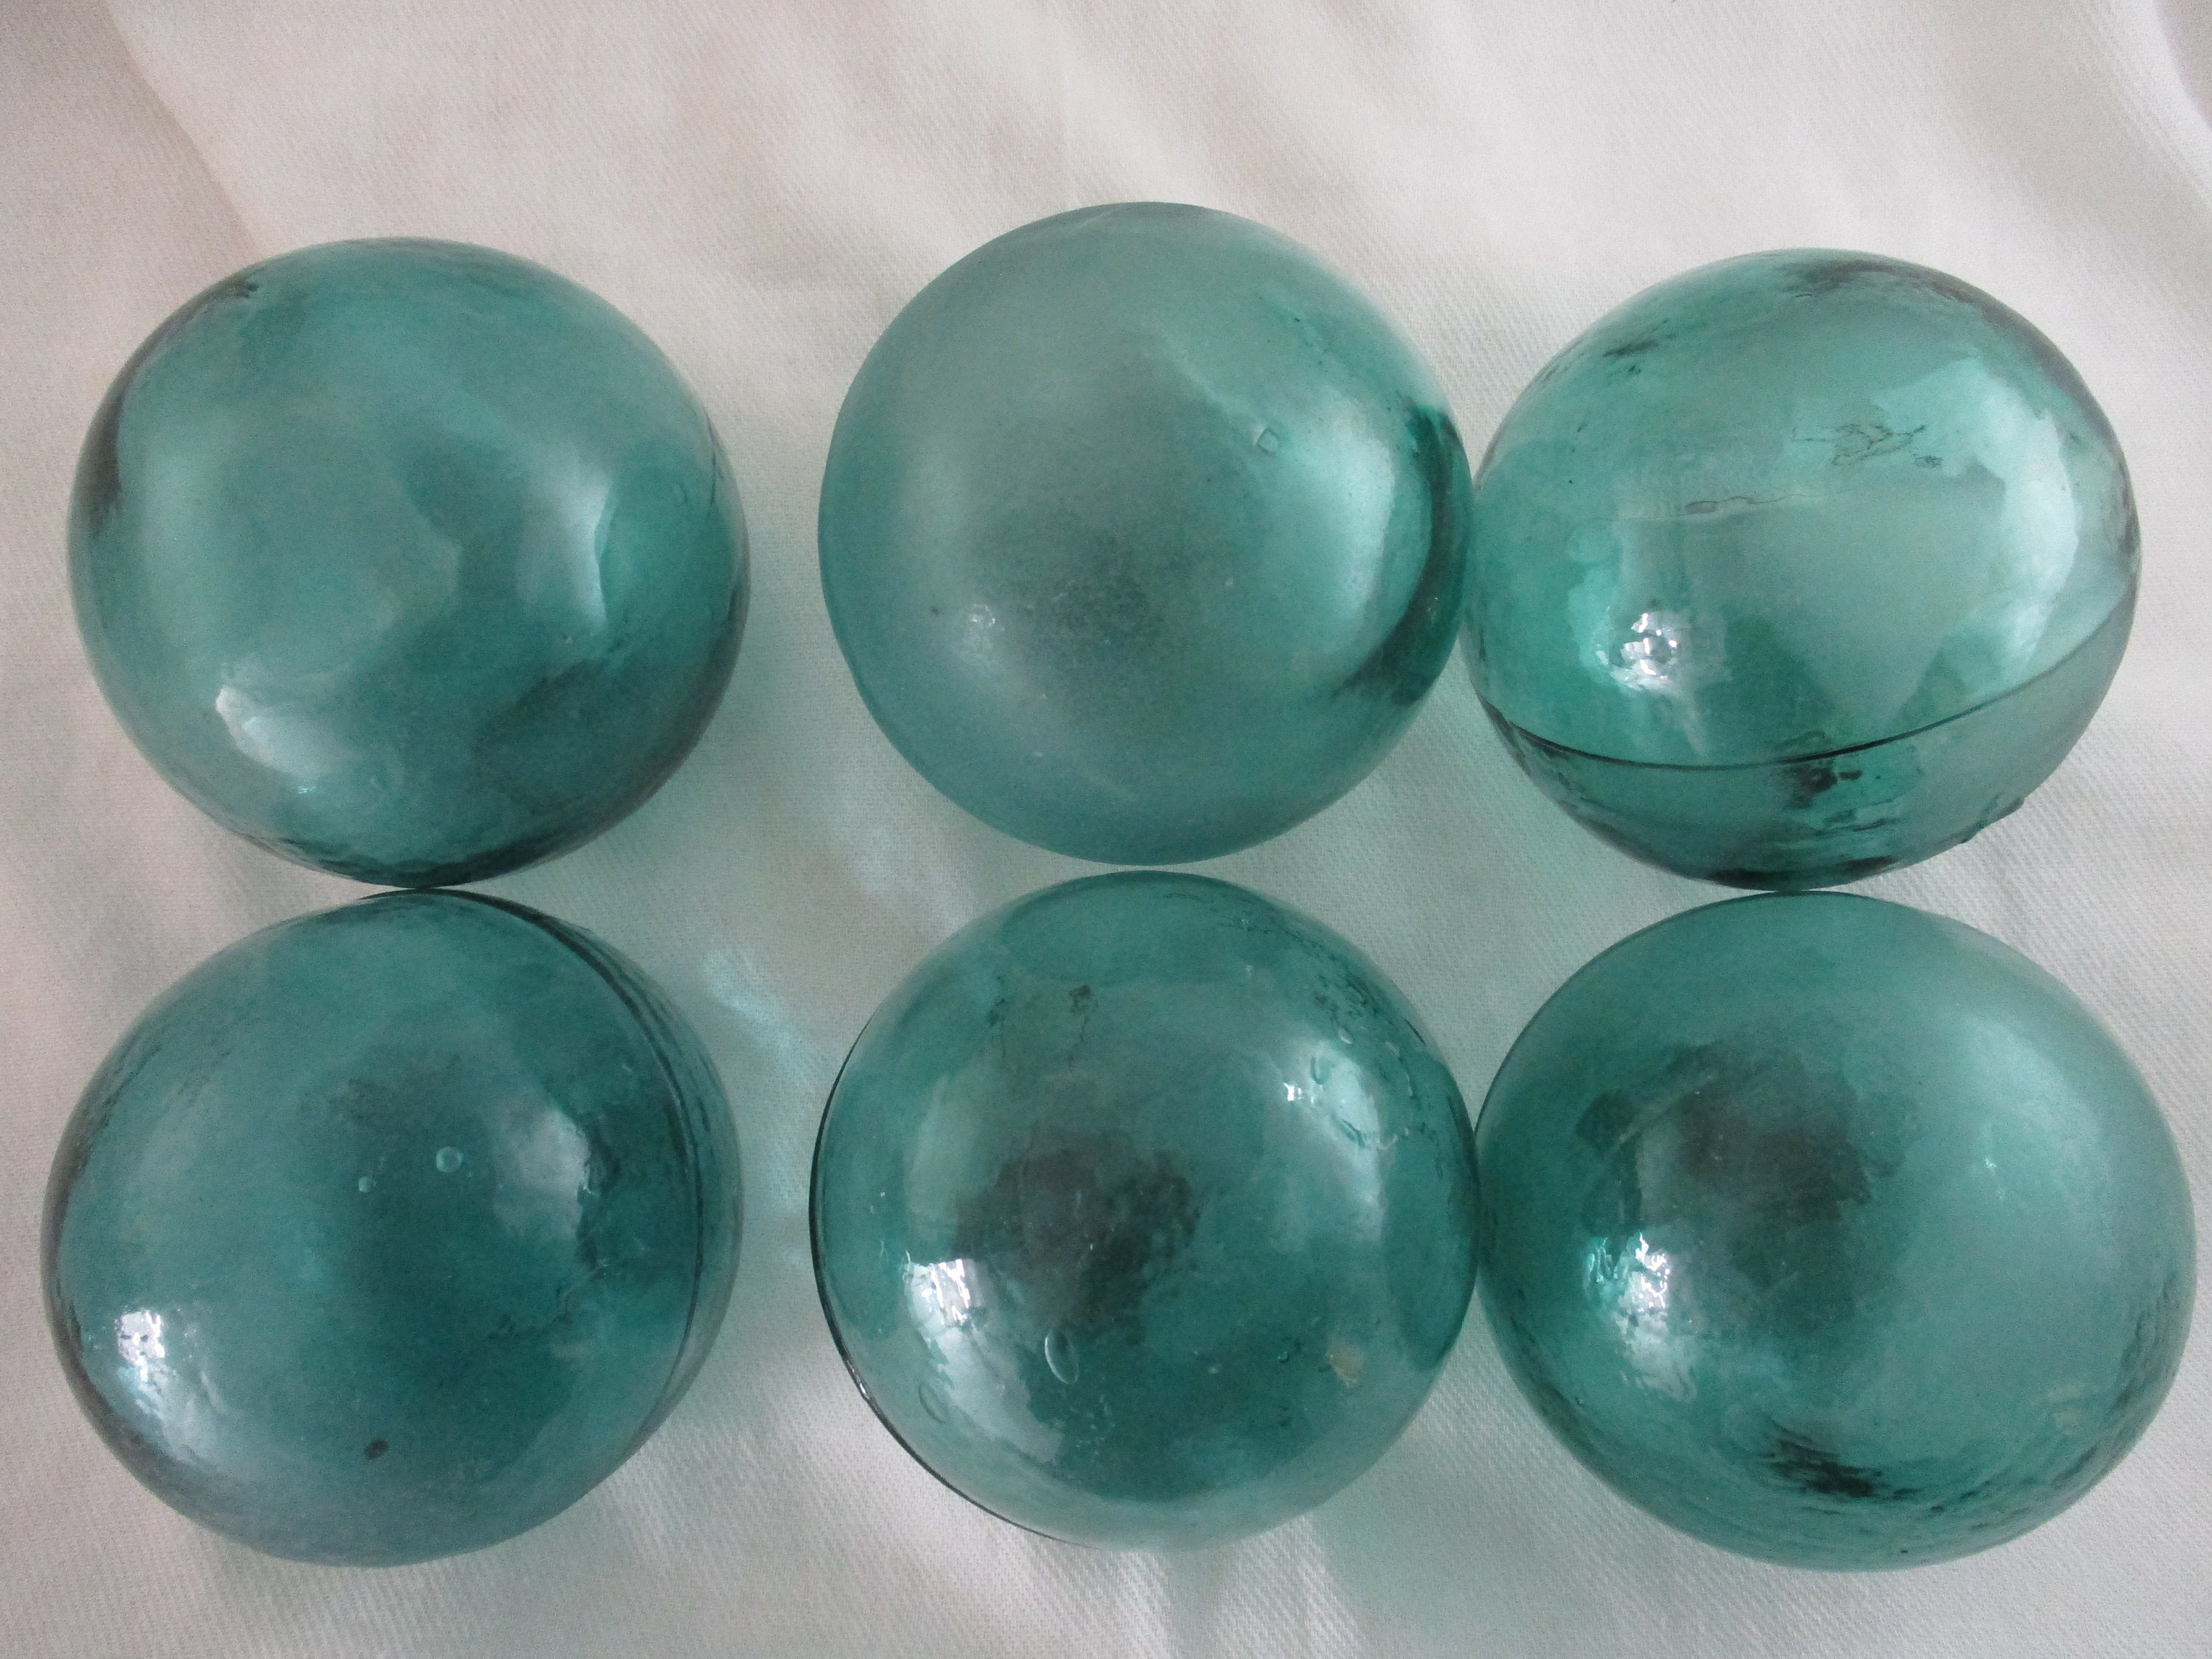 Six Teal/blue/green Authentic Antique Alaska Beachcombed Japanese Glass  Fishing Floats 